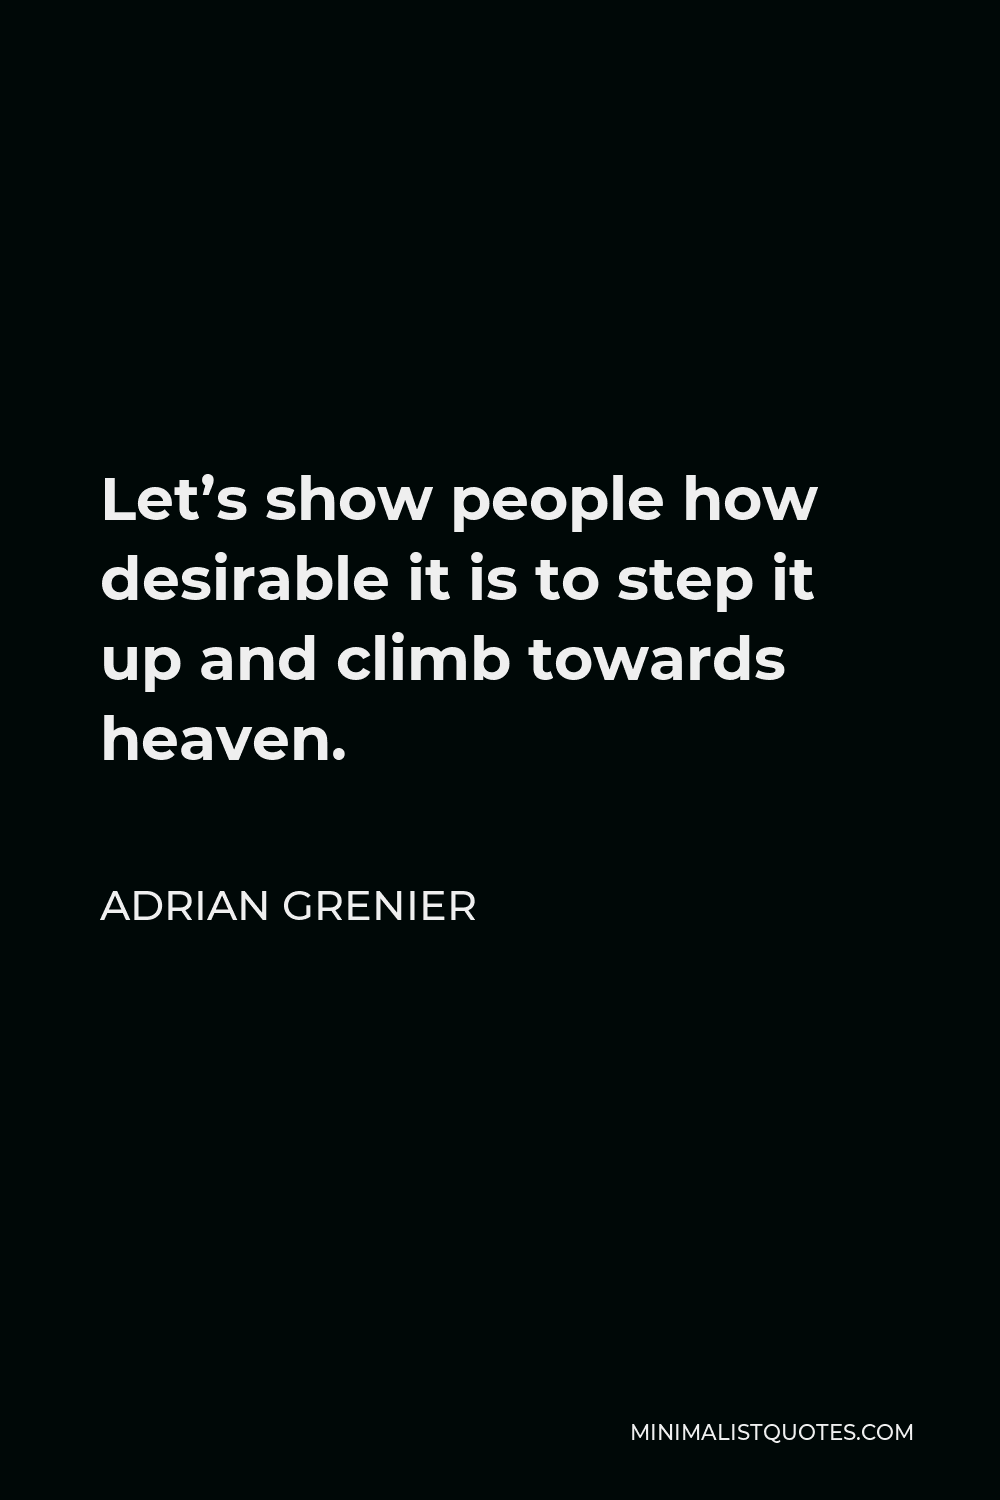 Adrian Grenier Quote - Let’s show people how desirable it is to step it up and climb towards heaven.